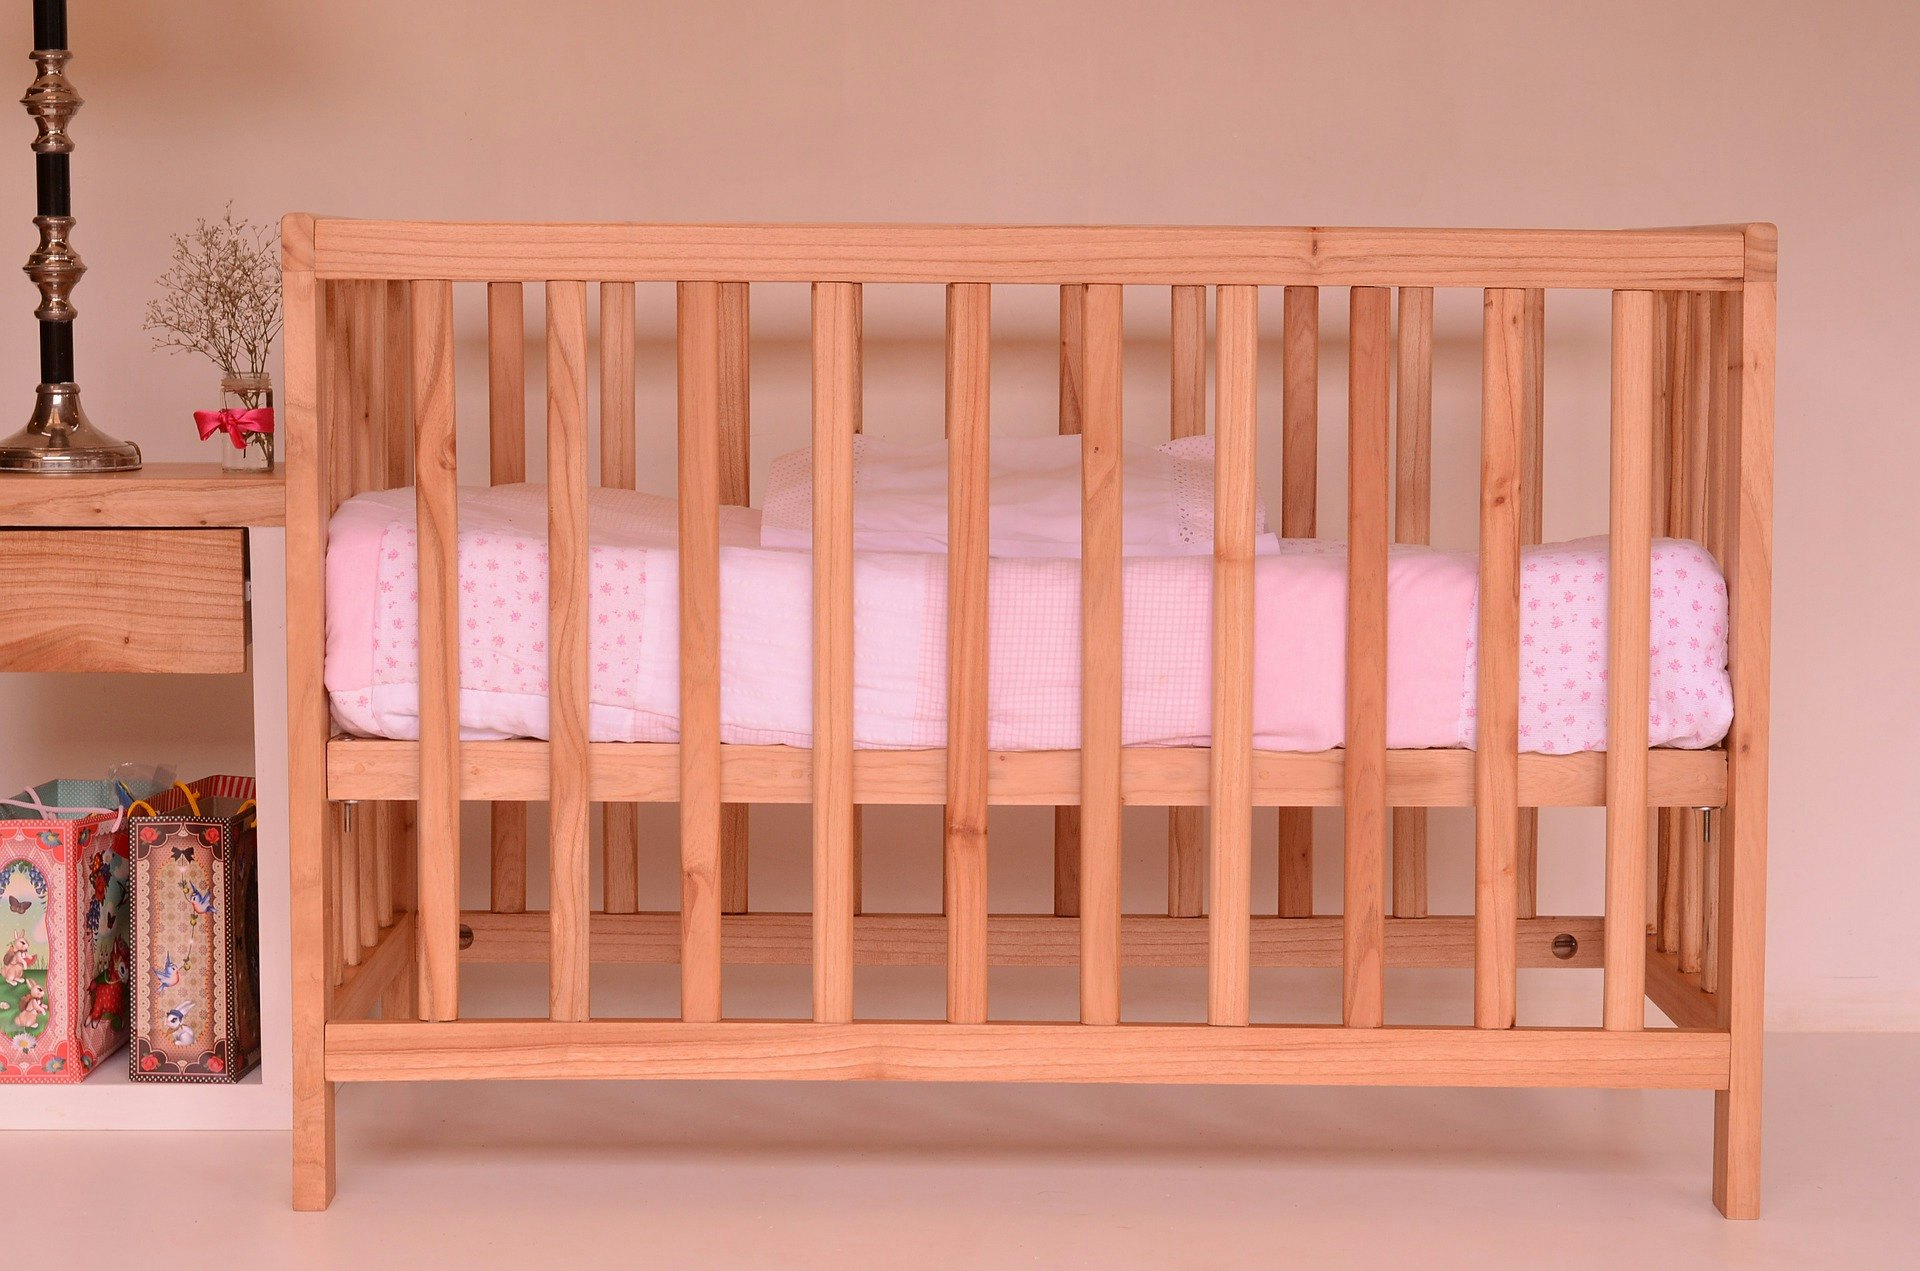 Can My Baby's Leg Get Stuck In The Crib Bars? It's A Real Concern